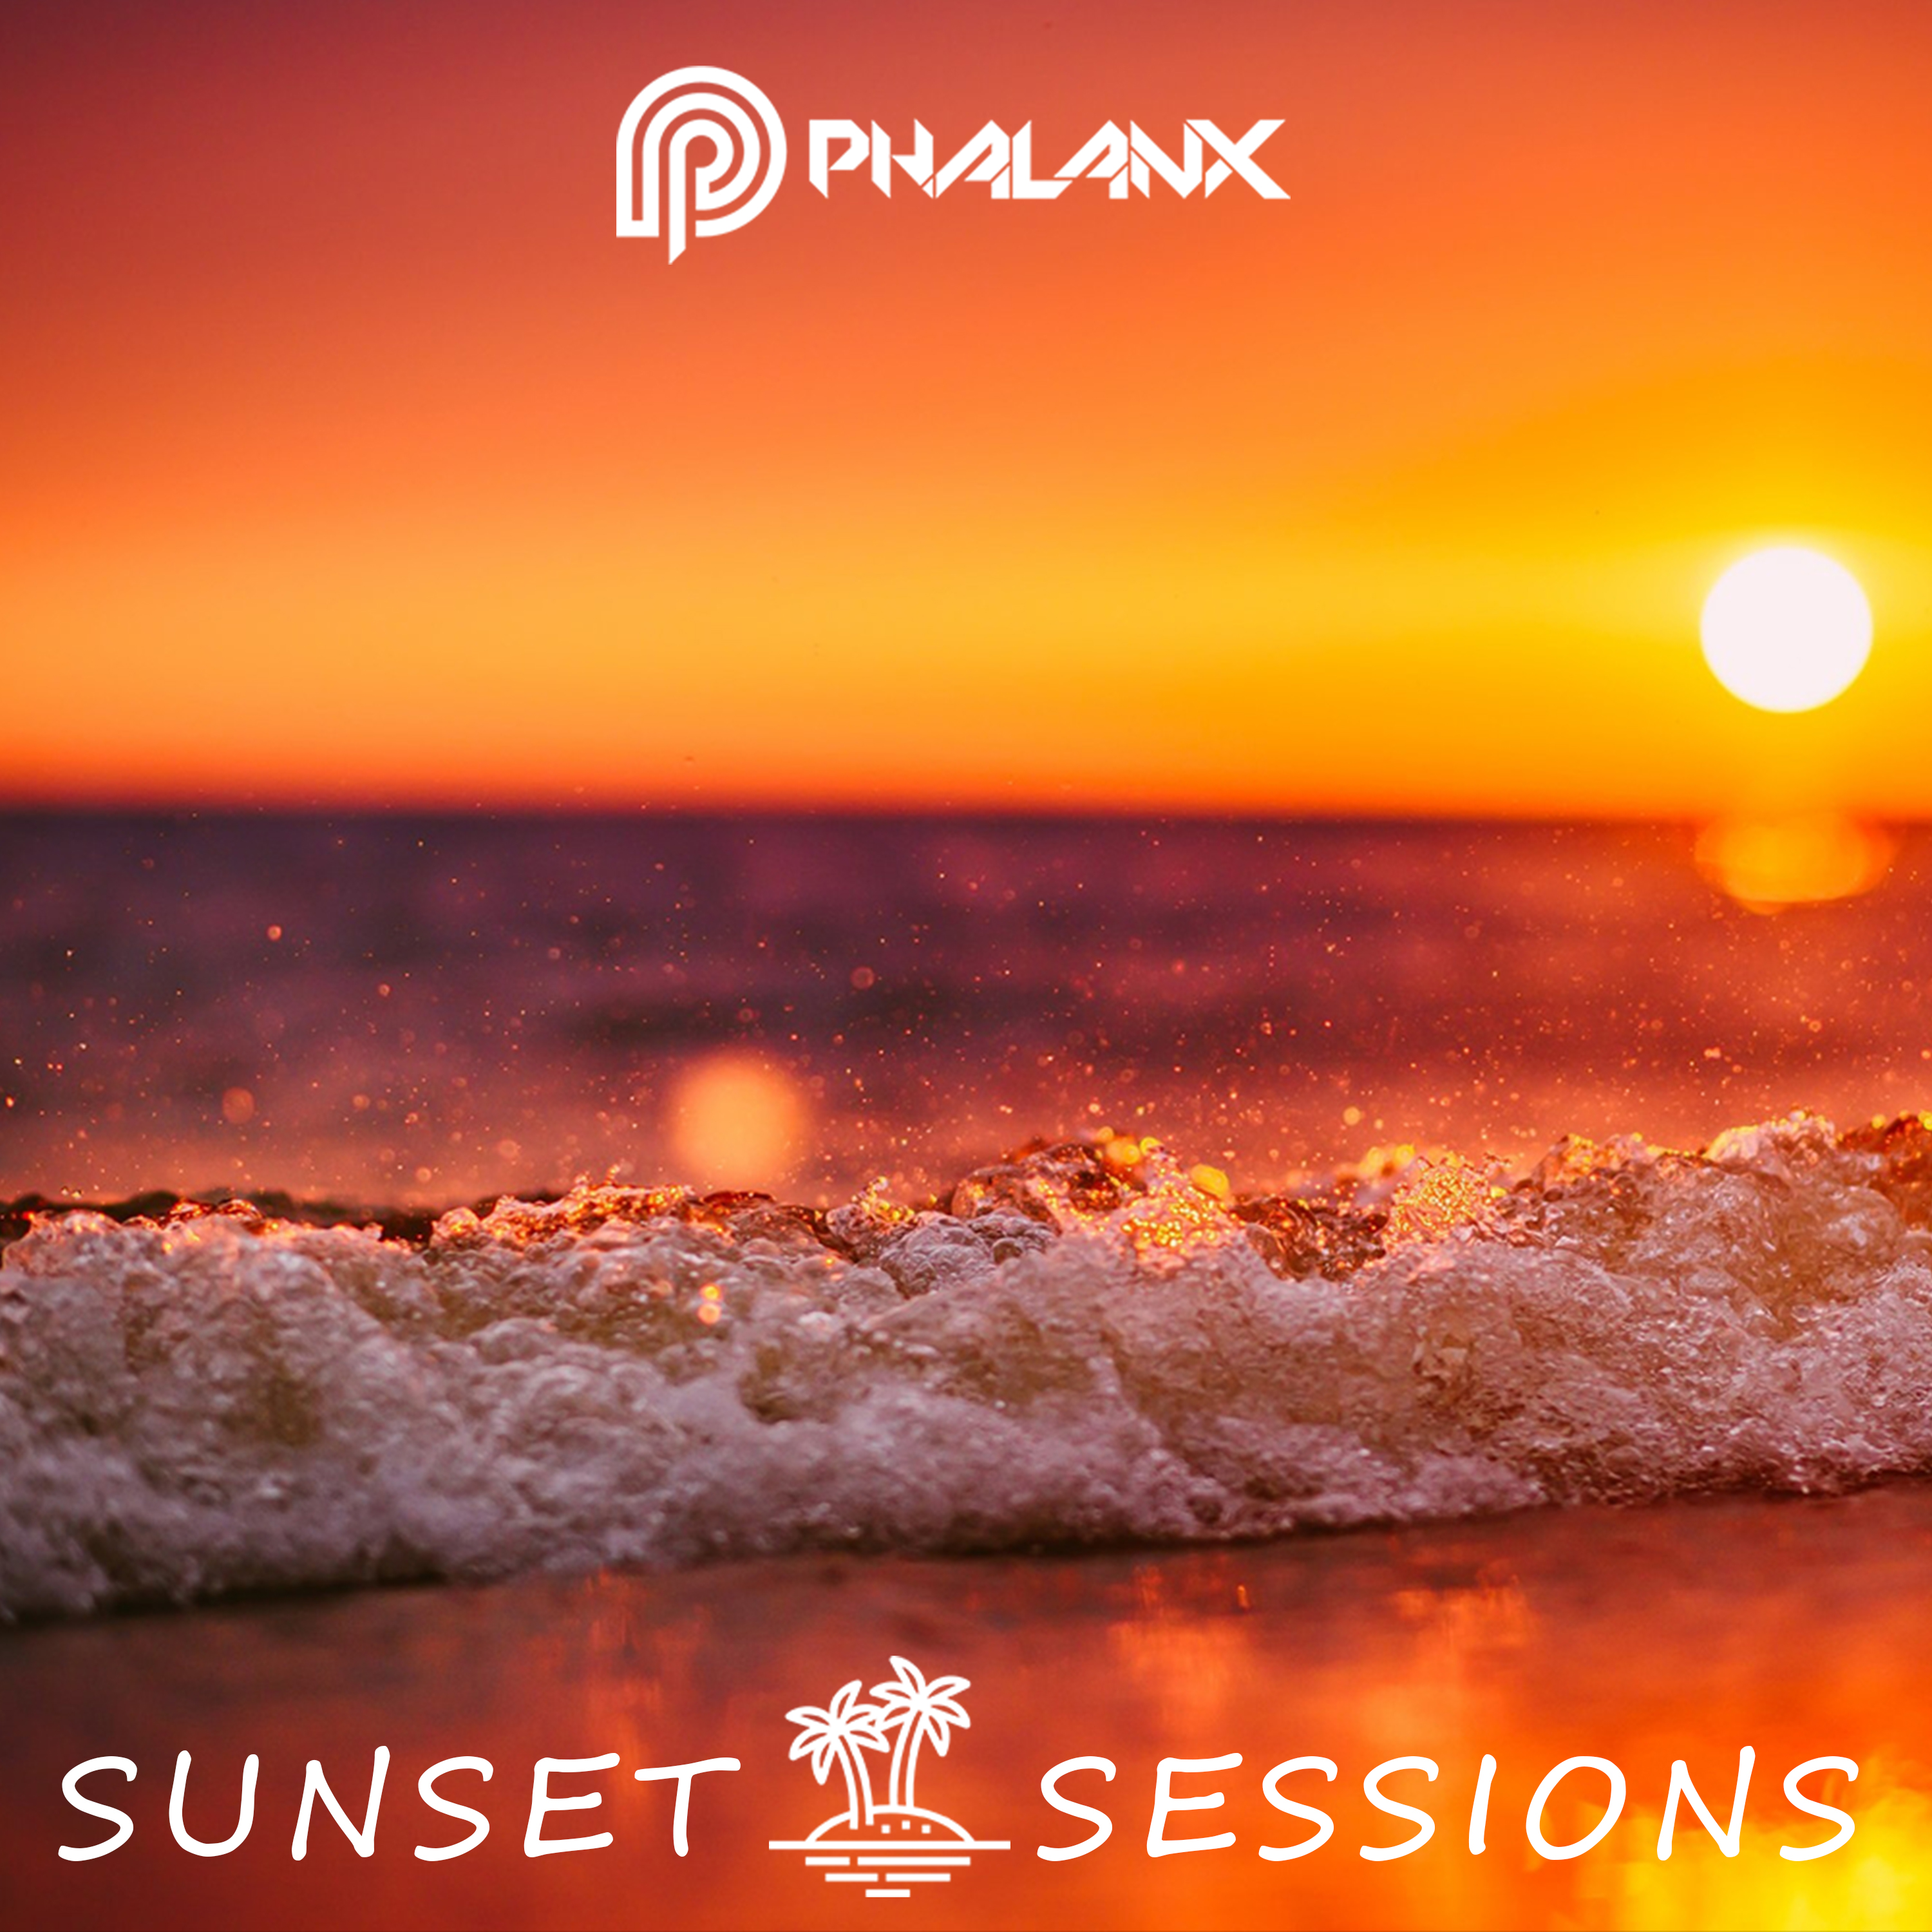 Sunset Beach Sessions EP. 002 [Melodic Progressive House]